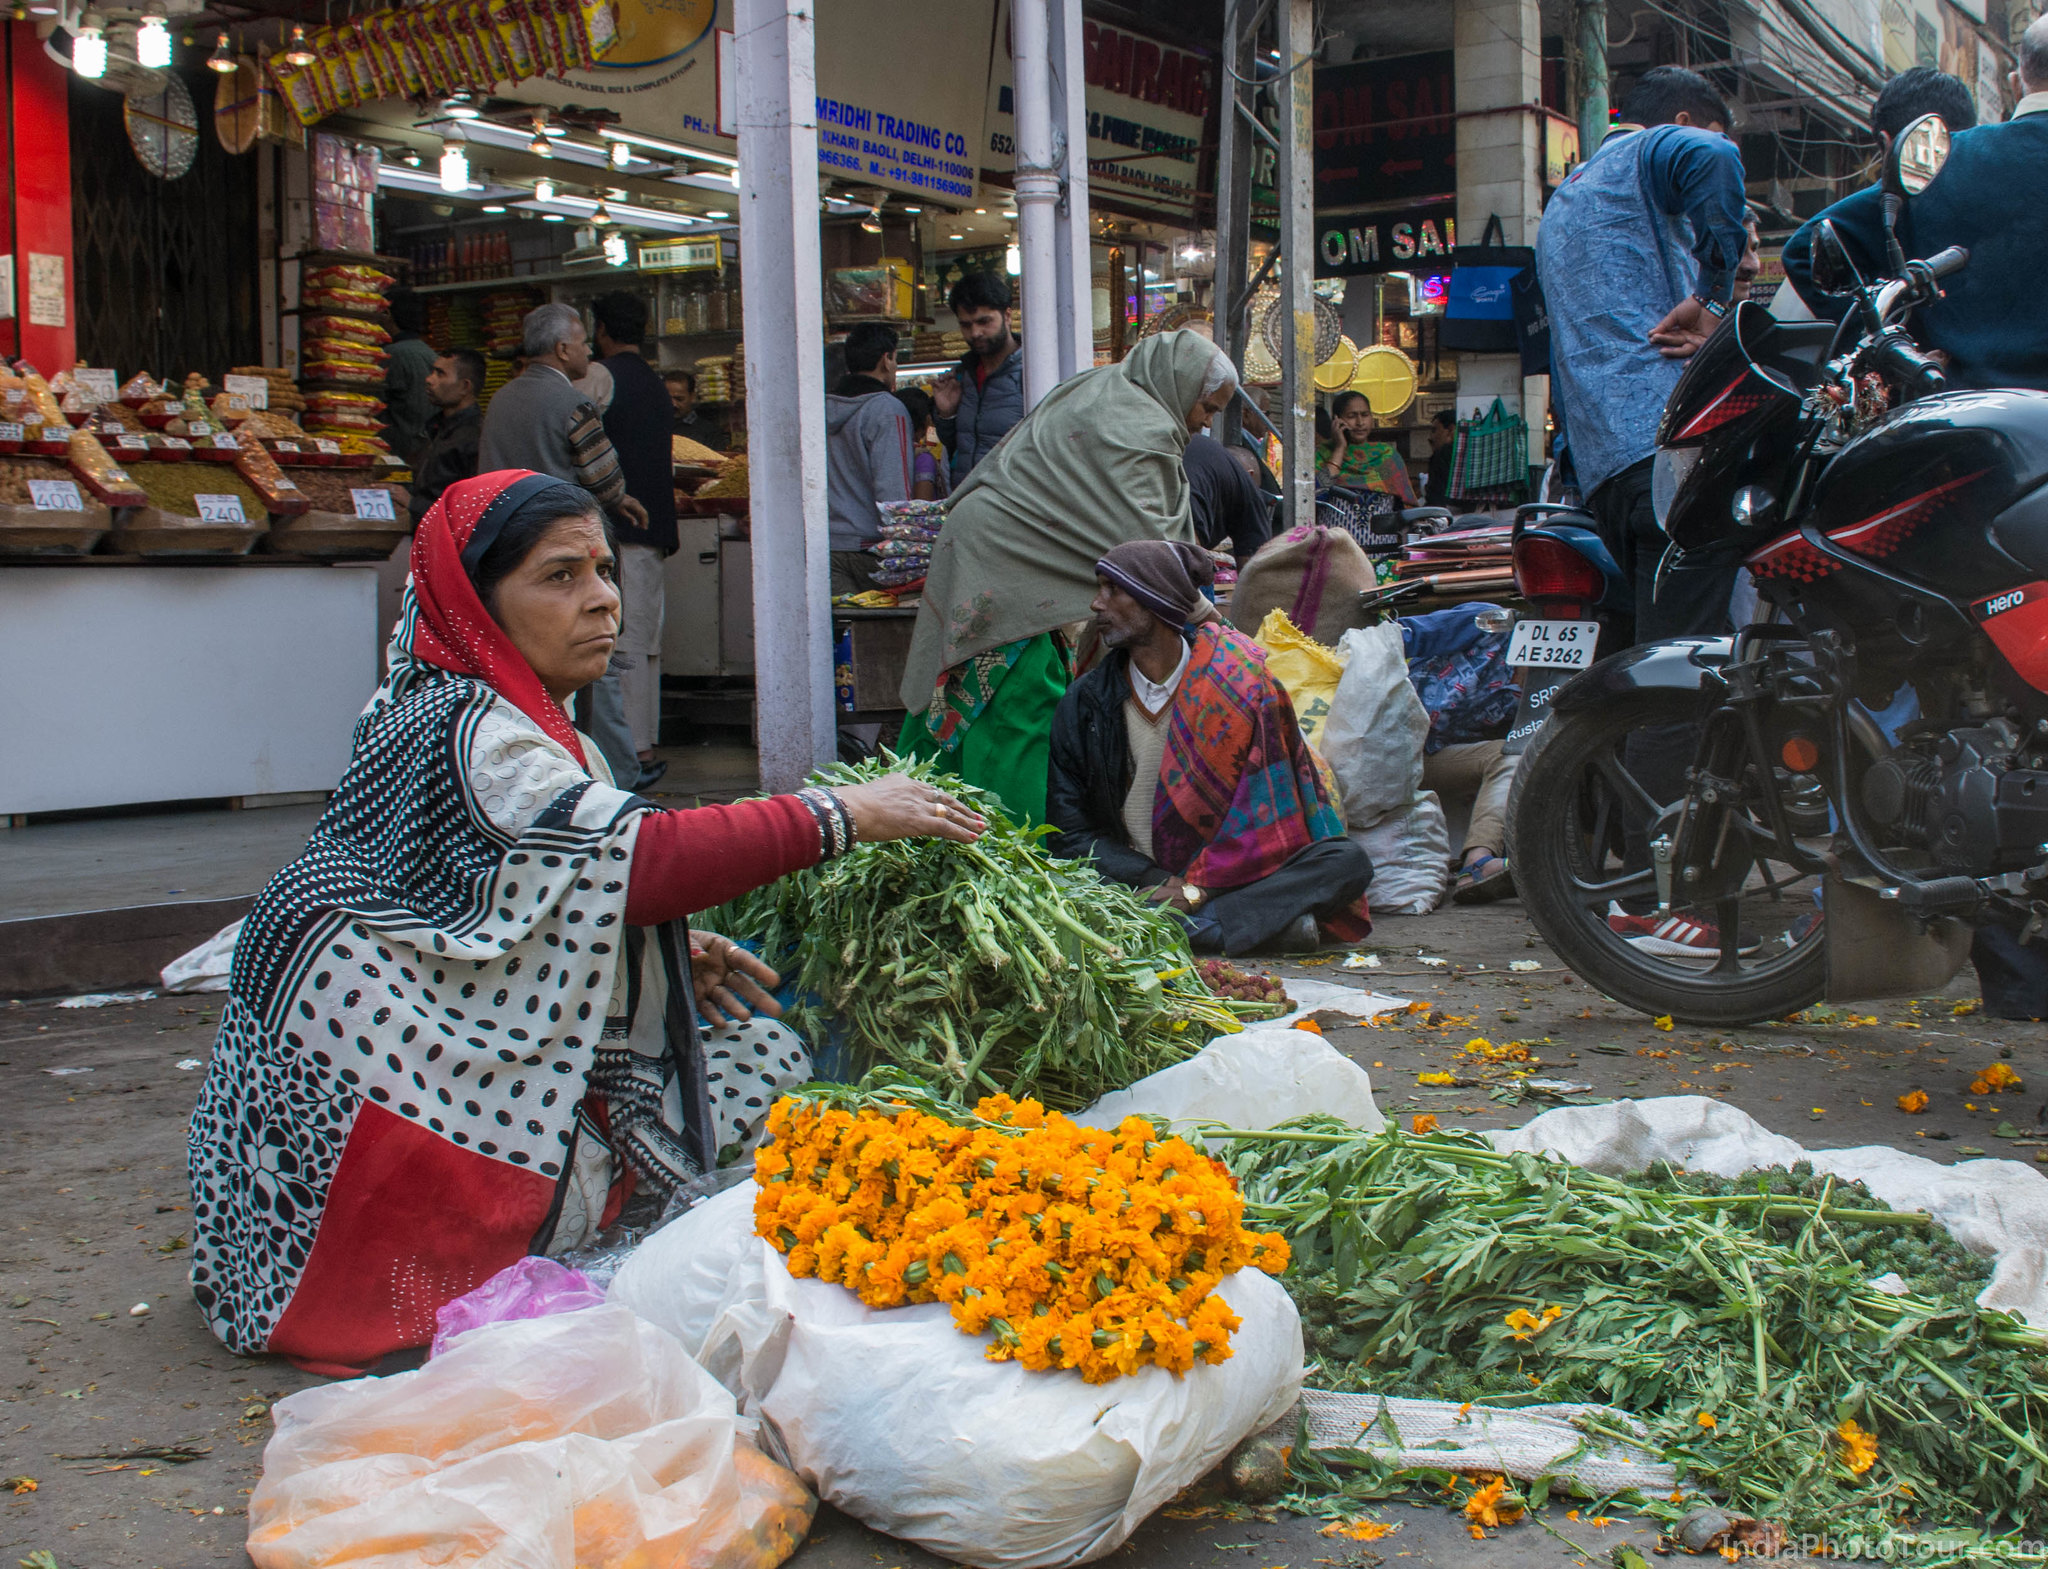 A vendor selling marigold flowers and cannabis plant used in a local festival